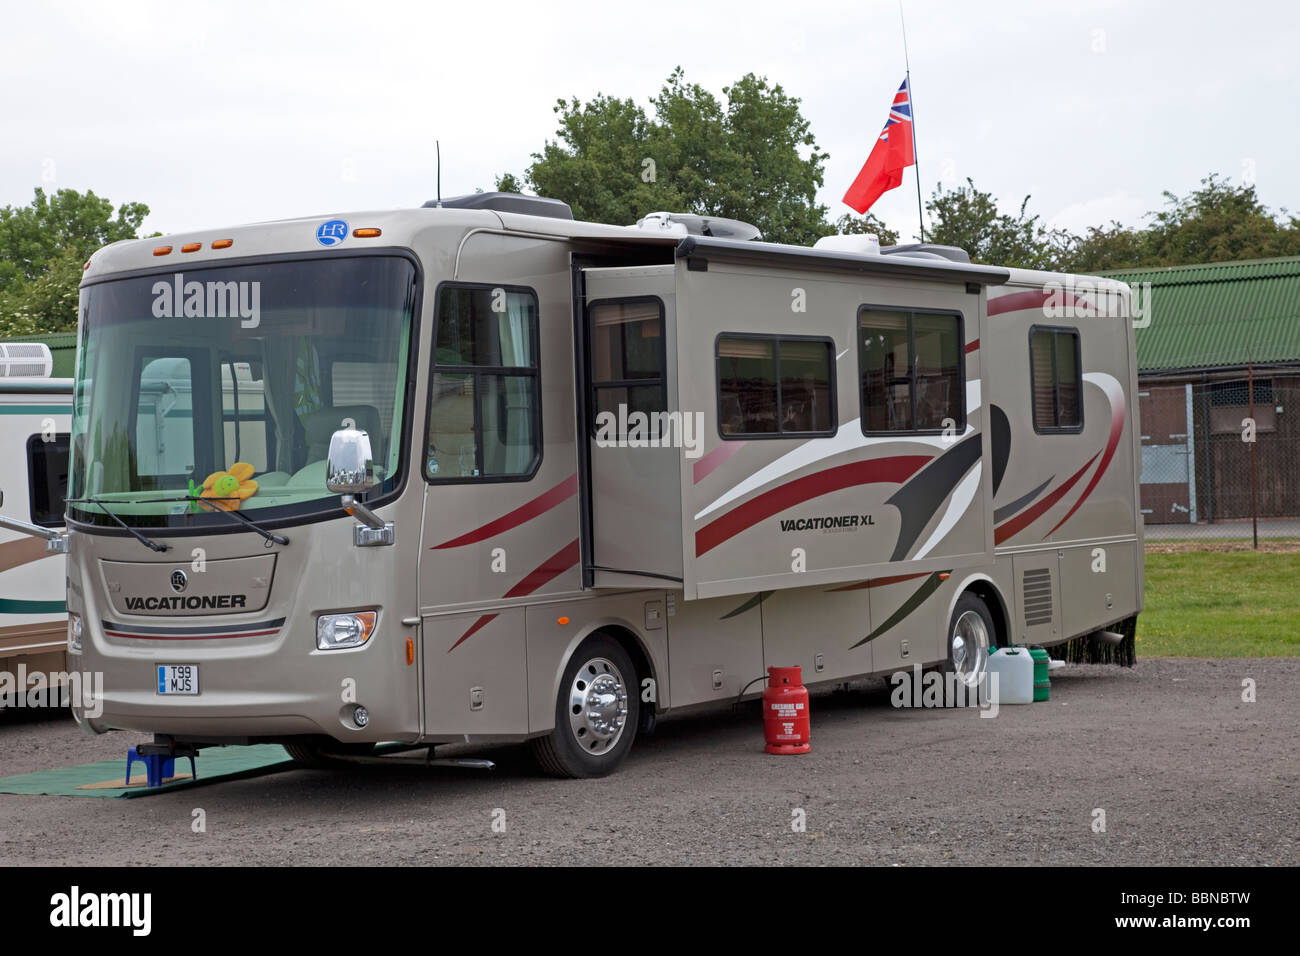 Vacationer RV motorhome with extending sides Stratford Racecourse UK Stock Photo